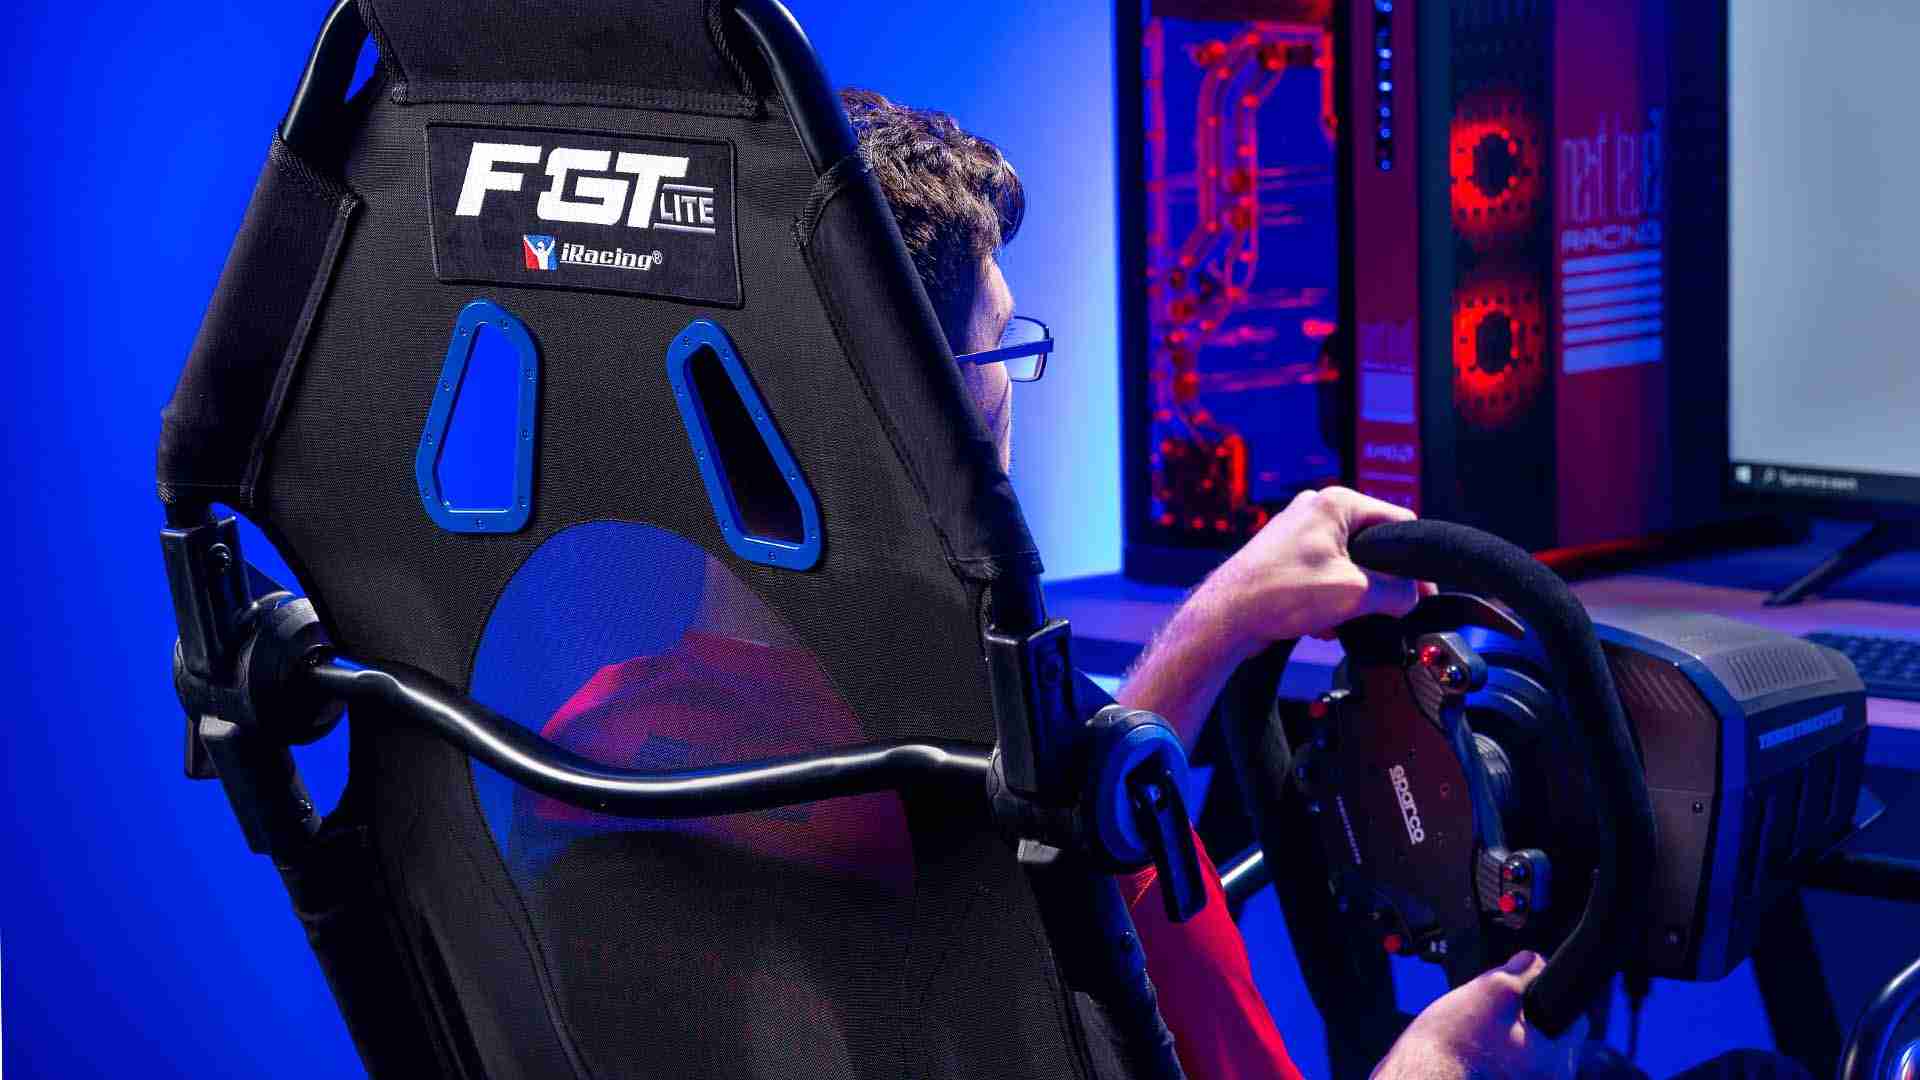 Next Level Racing F-GT Lite gaming seat review